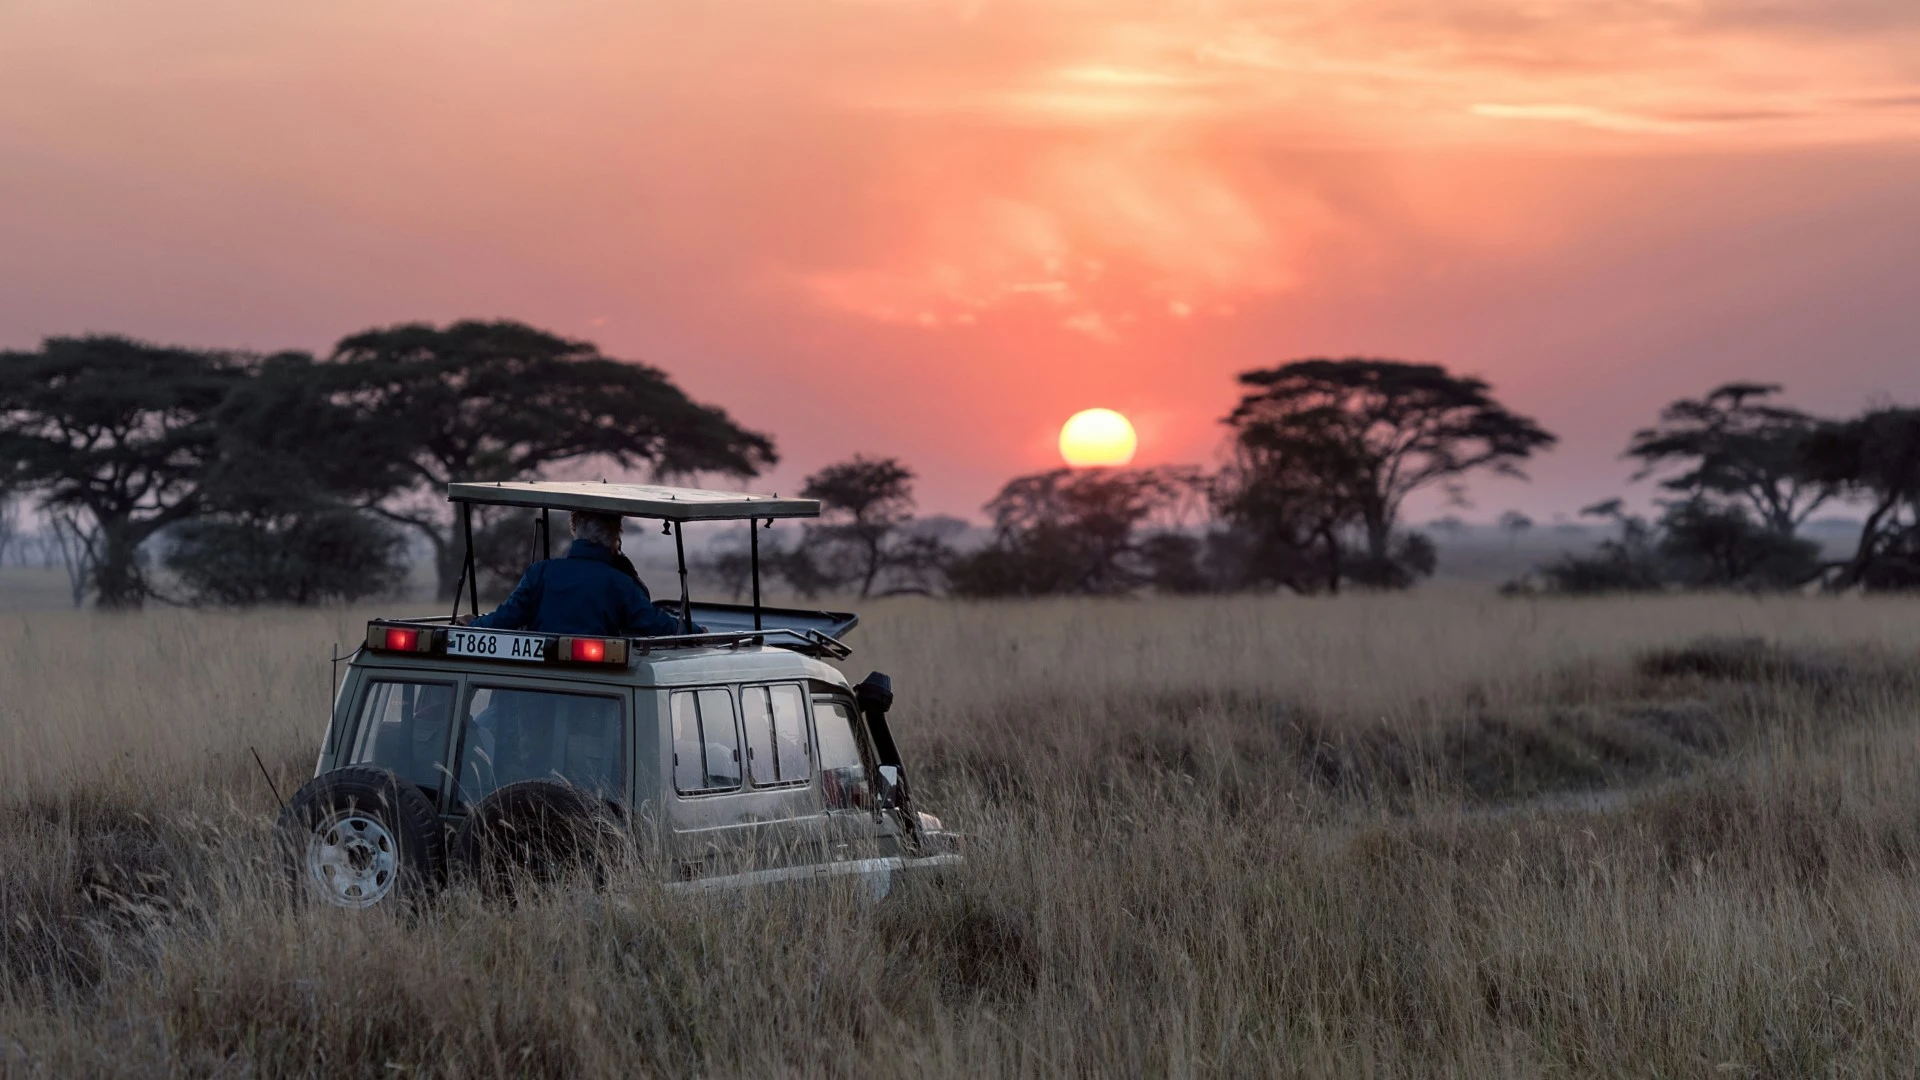 A tourism vehicle in Serengeti